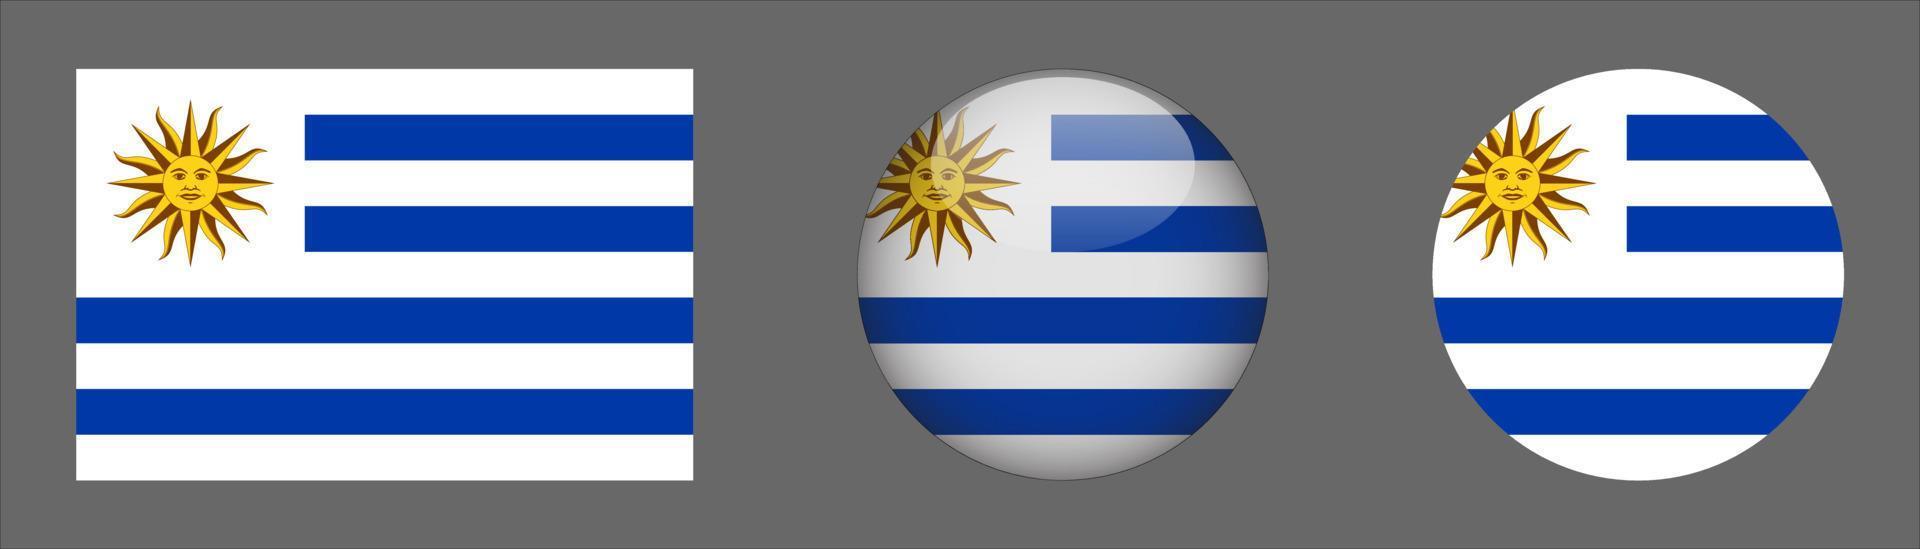 Uruguay Flag Set Collection, Original Size Ratio, 3D Rounded, Flat Rounded. vector